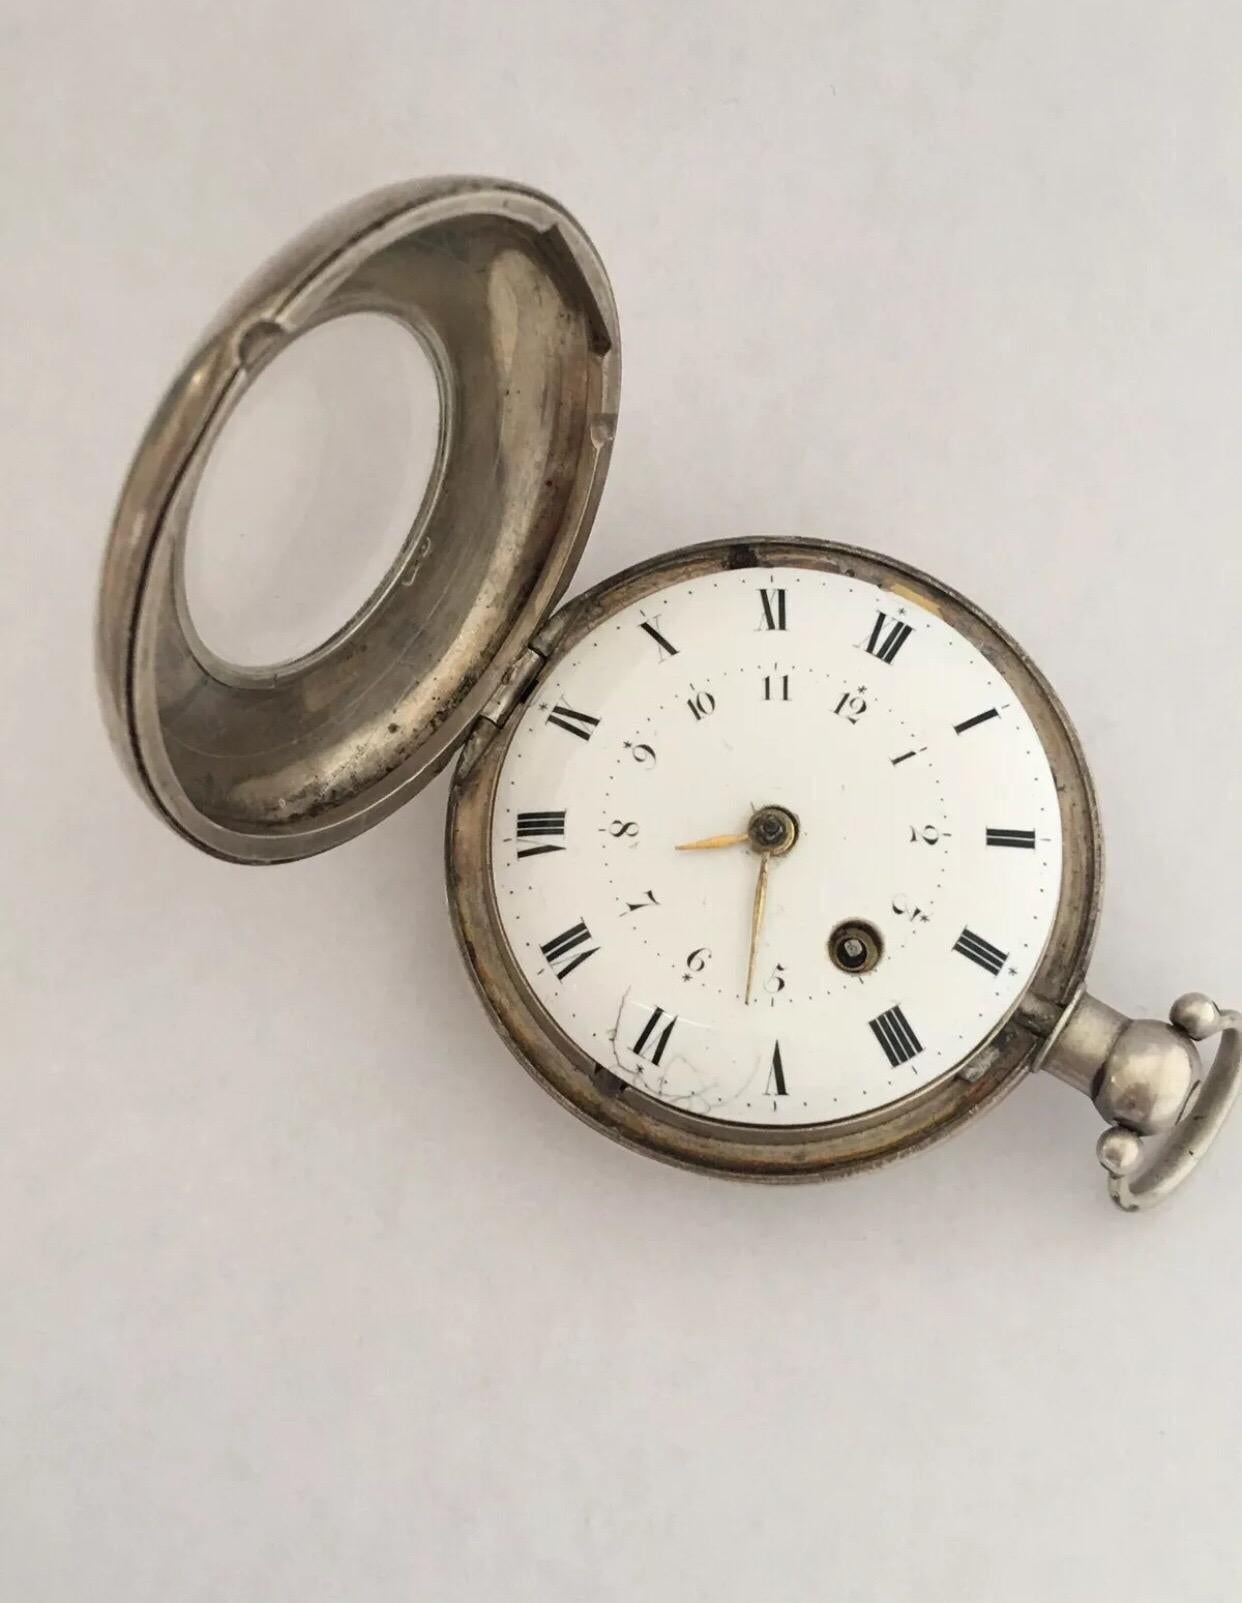 
Rare Early Verge Fusee Silver Half Hunter Cased London Maker Pocket Watch.
This watch is in good working condition and is ticking well. But I cannot guarantee the time accuracy. Some visible cracks on the enamel dial as seen in photos.